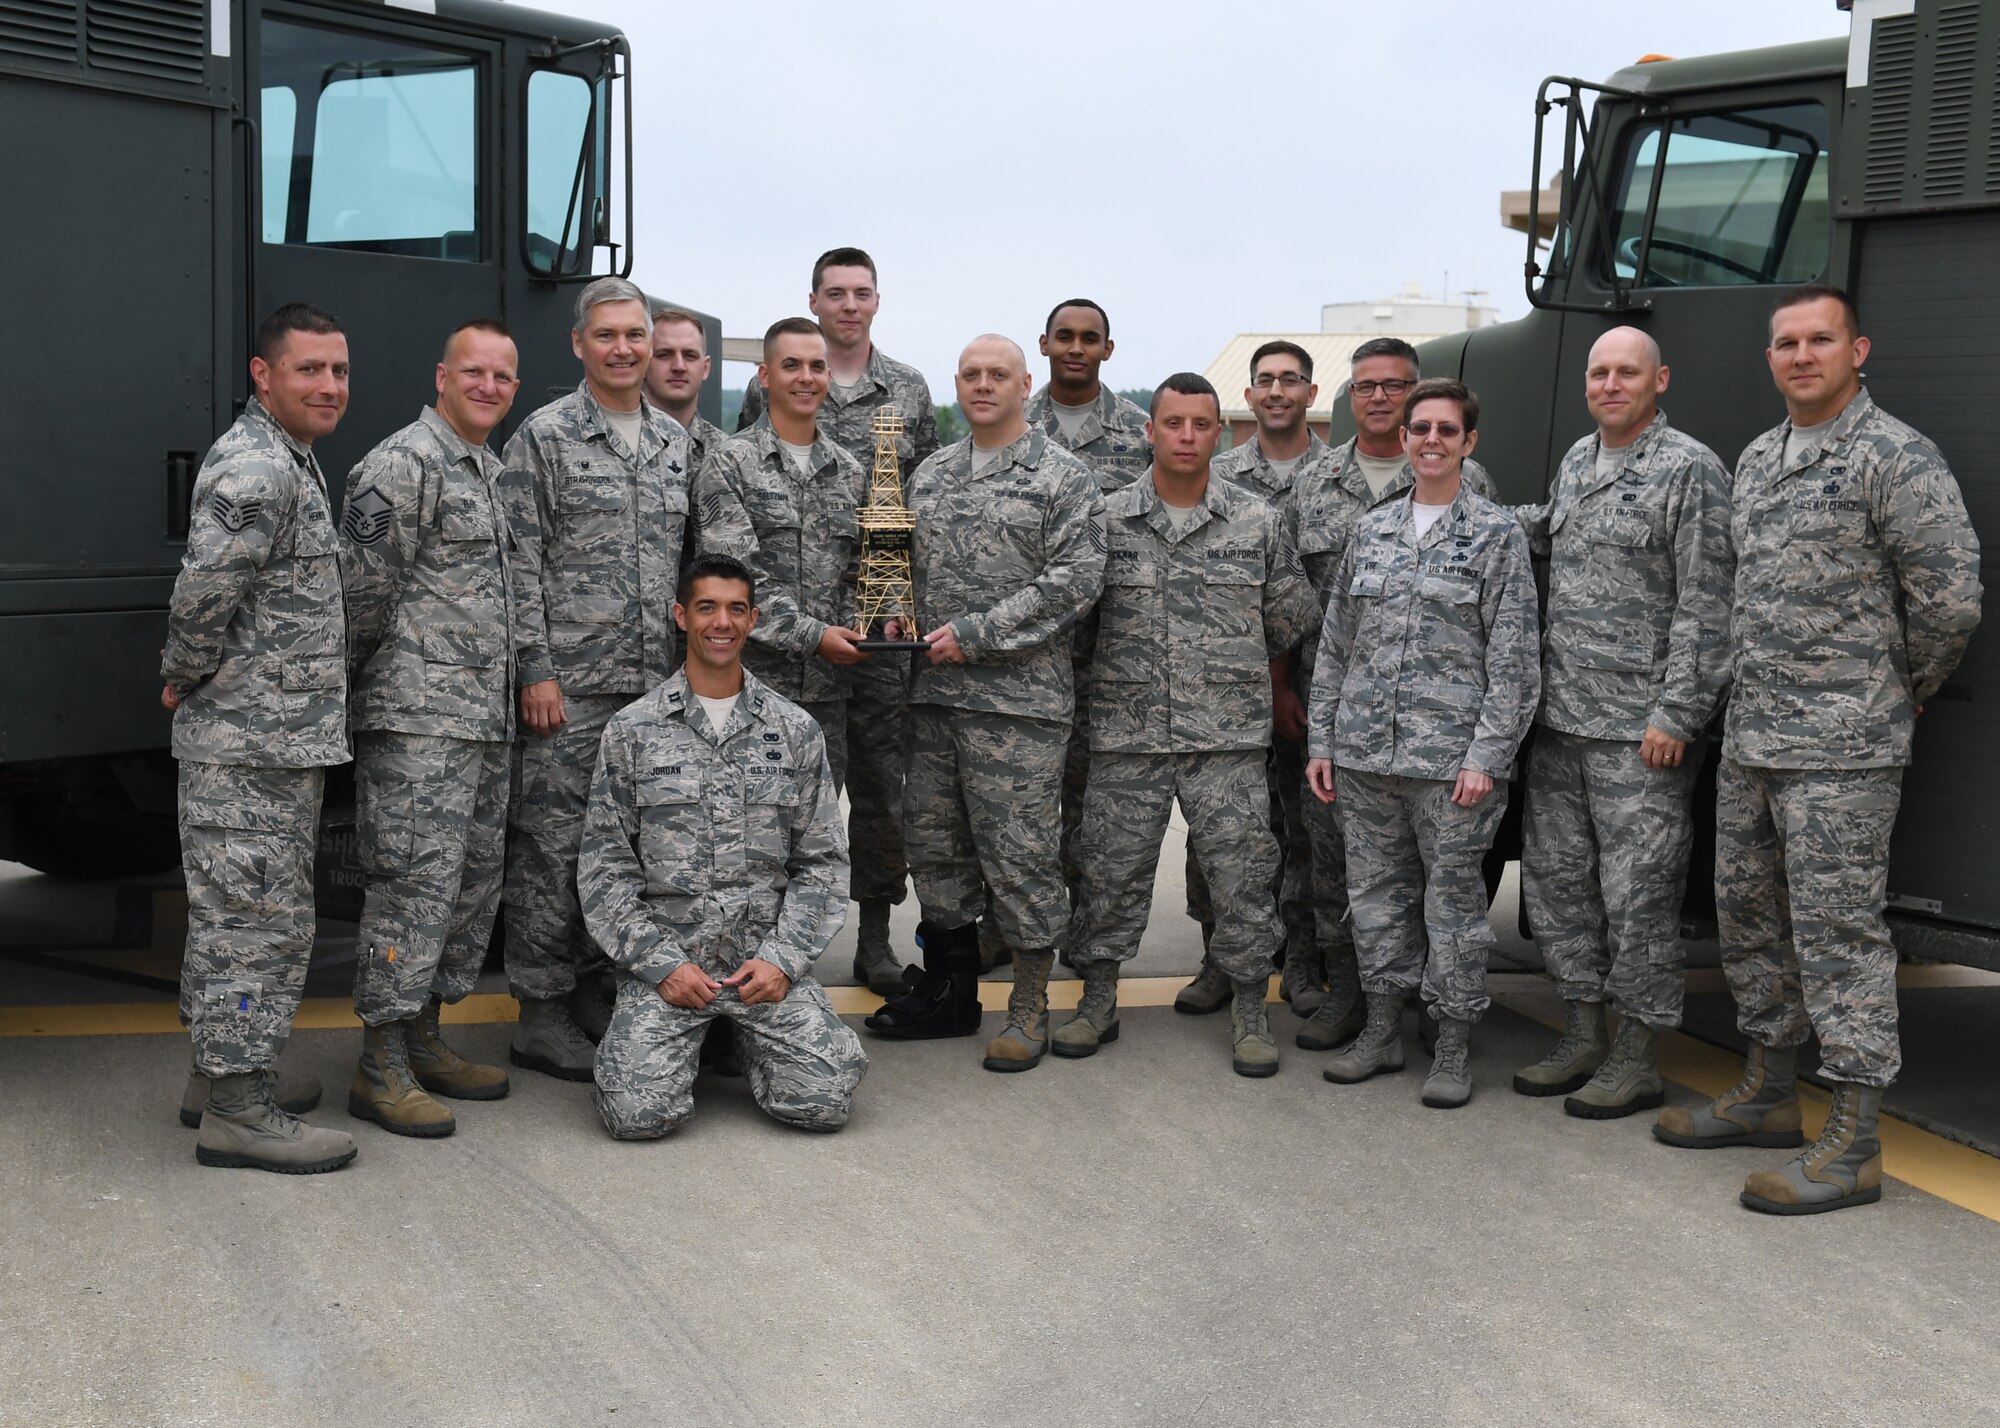 Col. Gretchen M. Wiltse and Col. Douglas Strawbridge stand with members of the 911th Fuels Management Flight on June 1, 2018, at Pittsburgh International Airport Air Reserve Station, Pennsylvania. The flight won the Golden Derrick award for Best Fuels Management Flight in the Air Force Reserve Command for 2017. Wiltse is the chief of the AFRC Logistics Readiness Division and Strawbride is the commander of the 911th Airlift Wing.(U.S. Air Force Photo by Staff Sgt. Zachary Vucic)